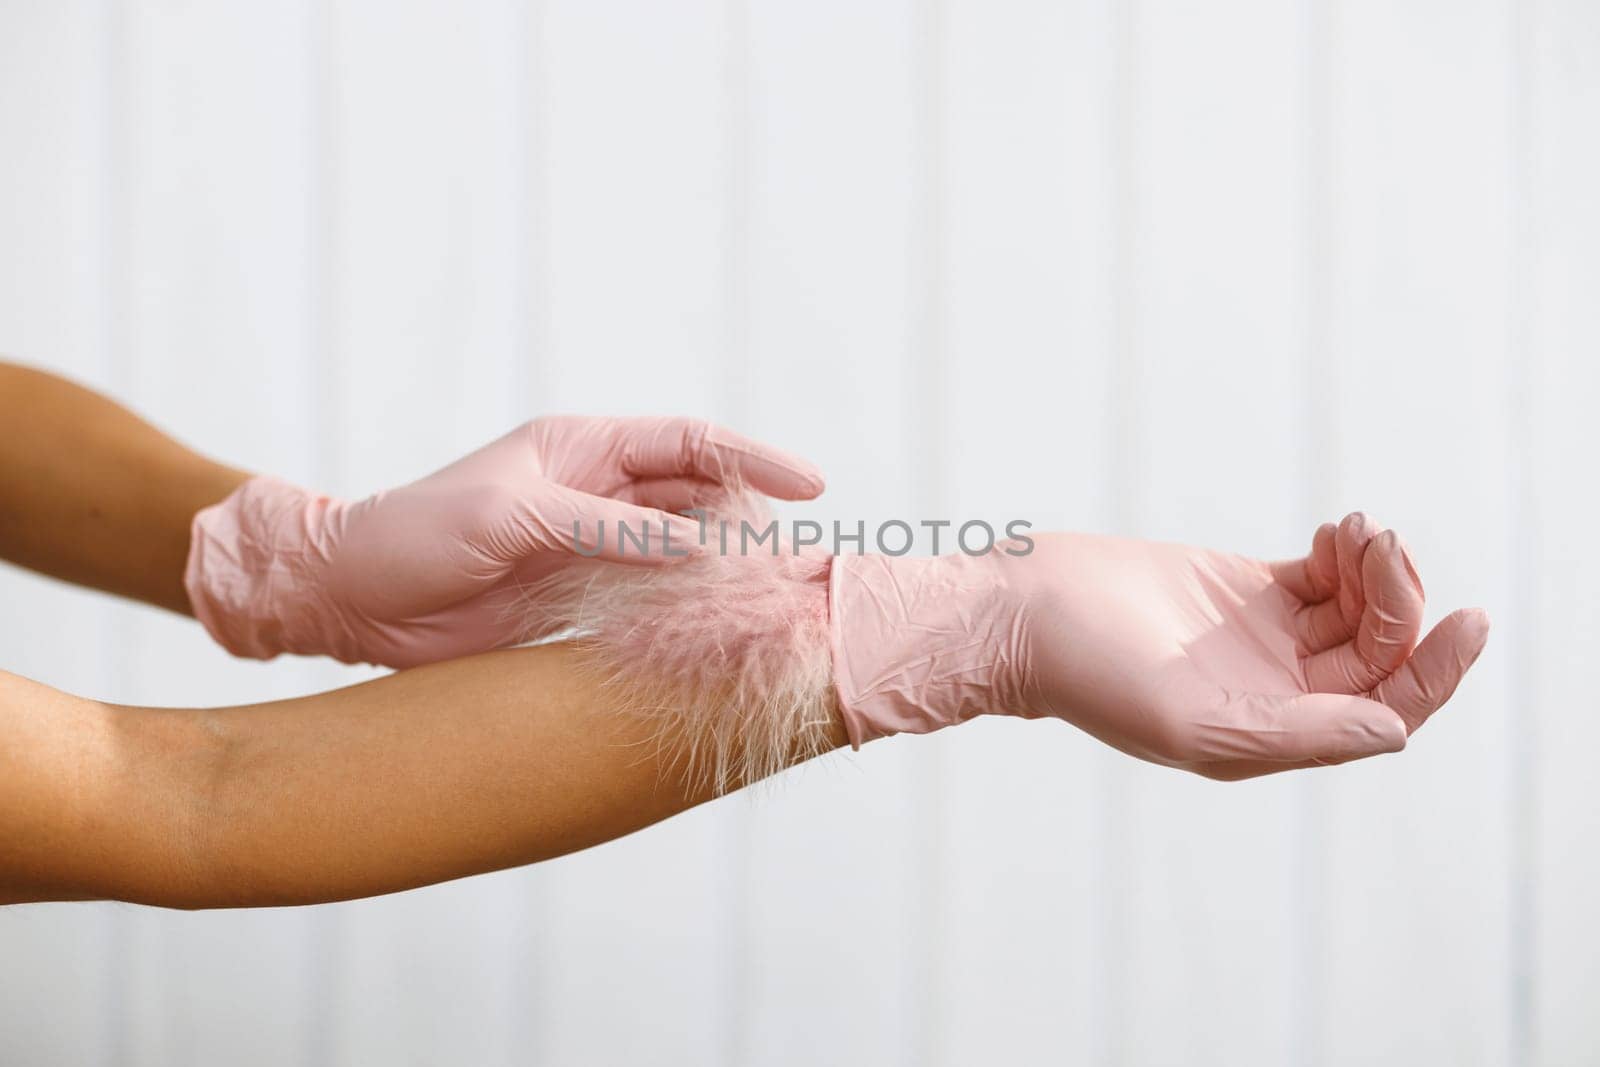 Feather to female hand on white background. Concept of lightness easing and cleanliness. Hand Skin Care. Woman Hands With Soft Feather. Body Care